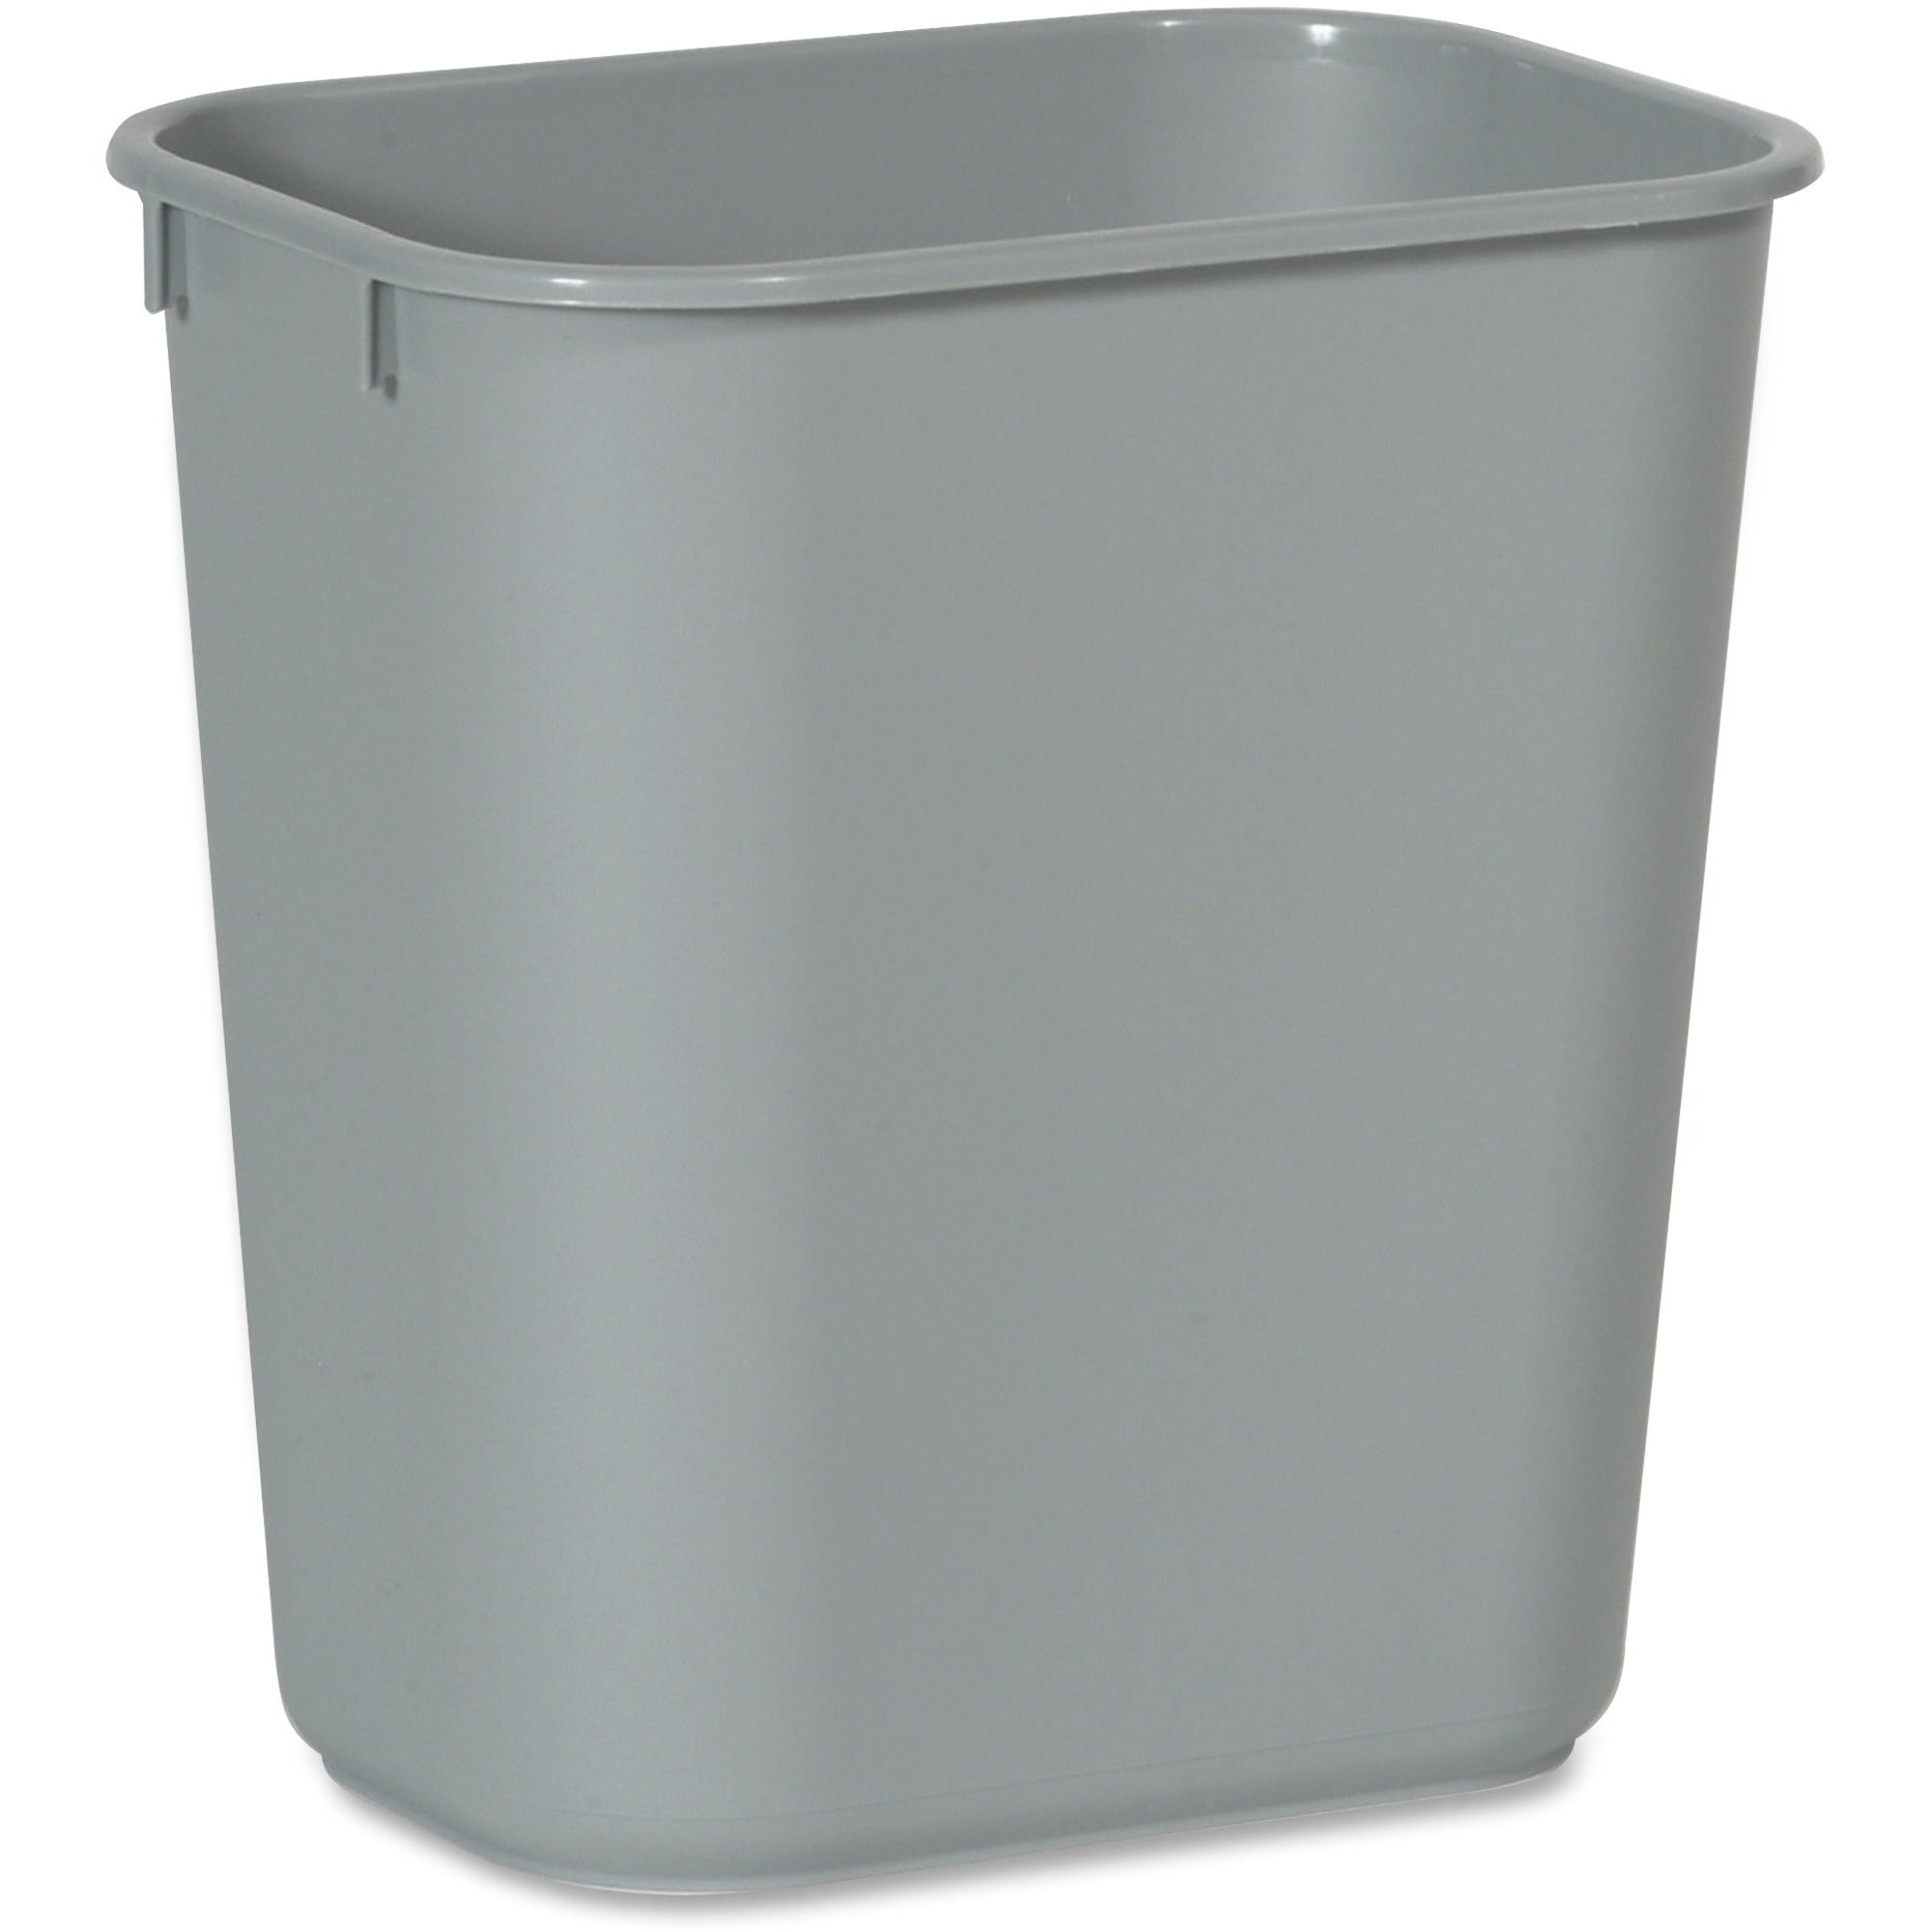 rubbermaid-commercial-13-qt-standard-deskside-wastebaskets-325-gal-capacity-dent-resistant-rust-resistant-easy-to-clean-durable-121-height-x-83-width-x-114-depth-plastic-gray-12-carton_rcp2955gyct - 1